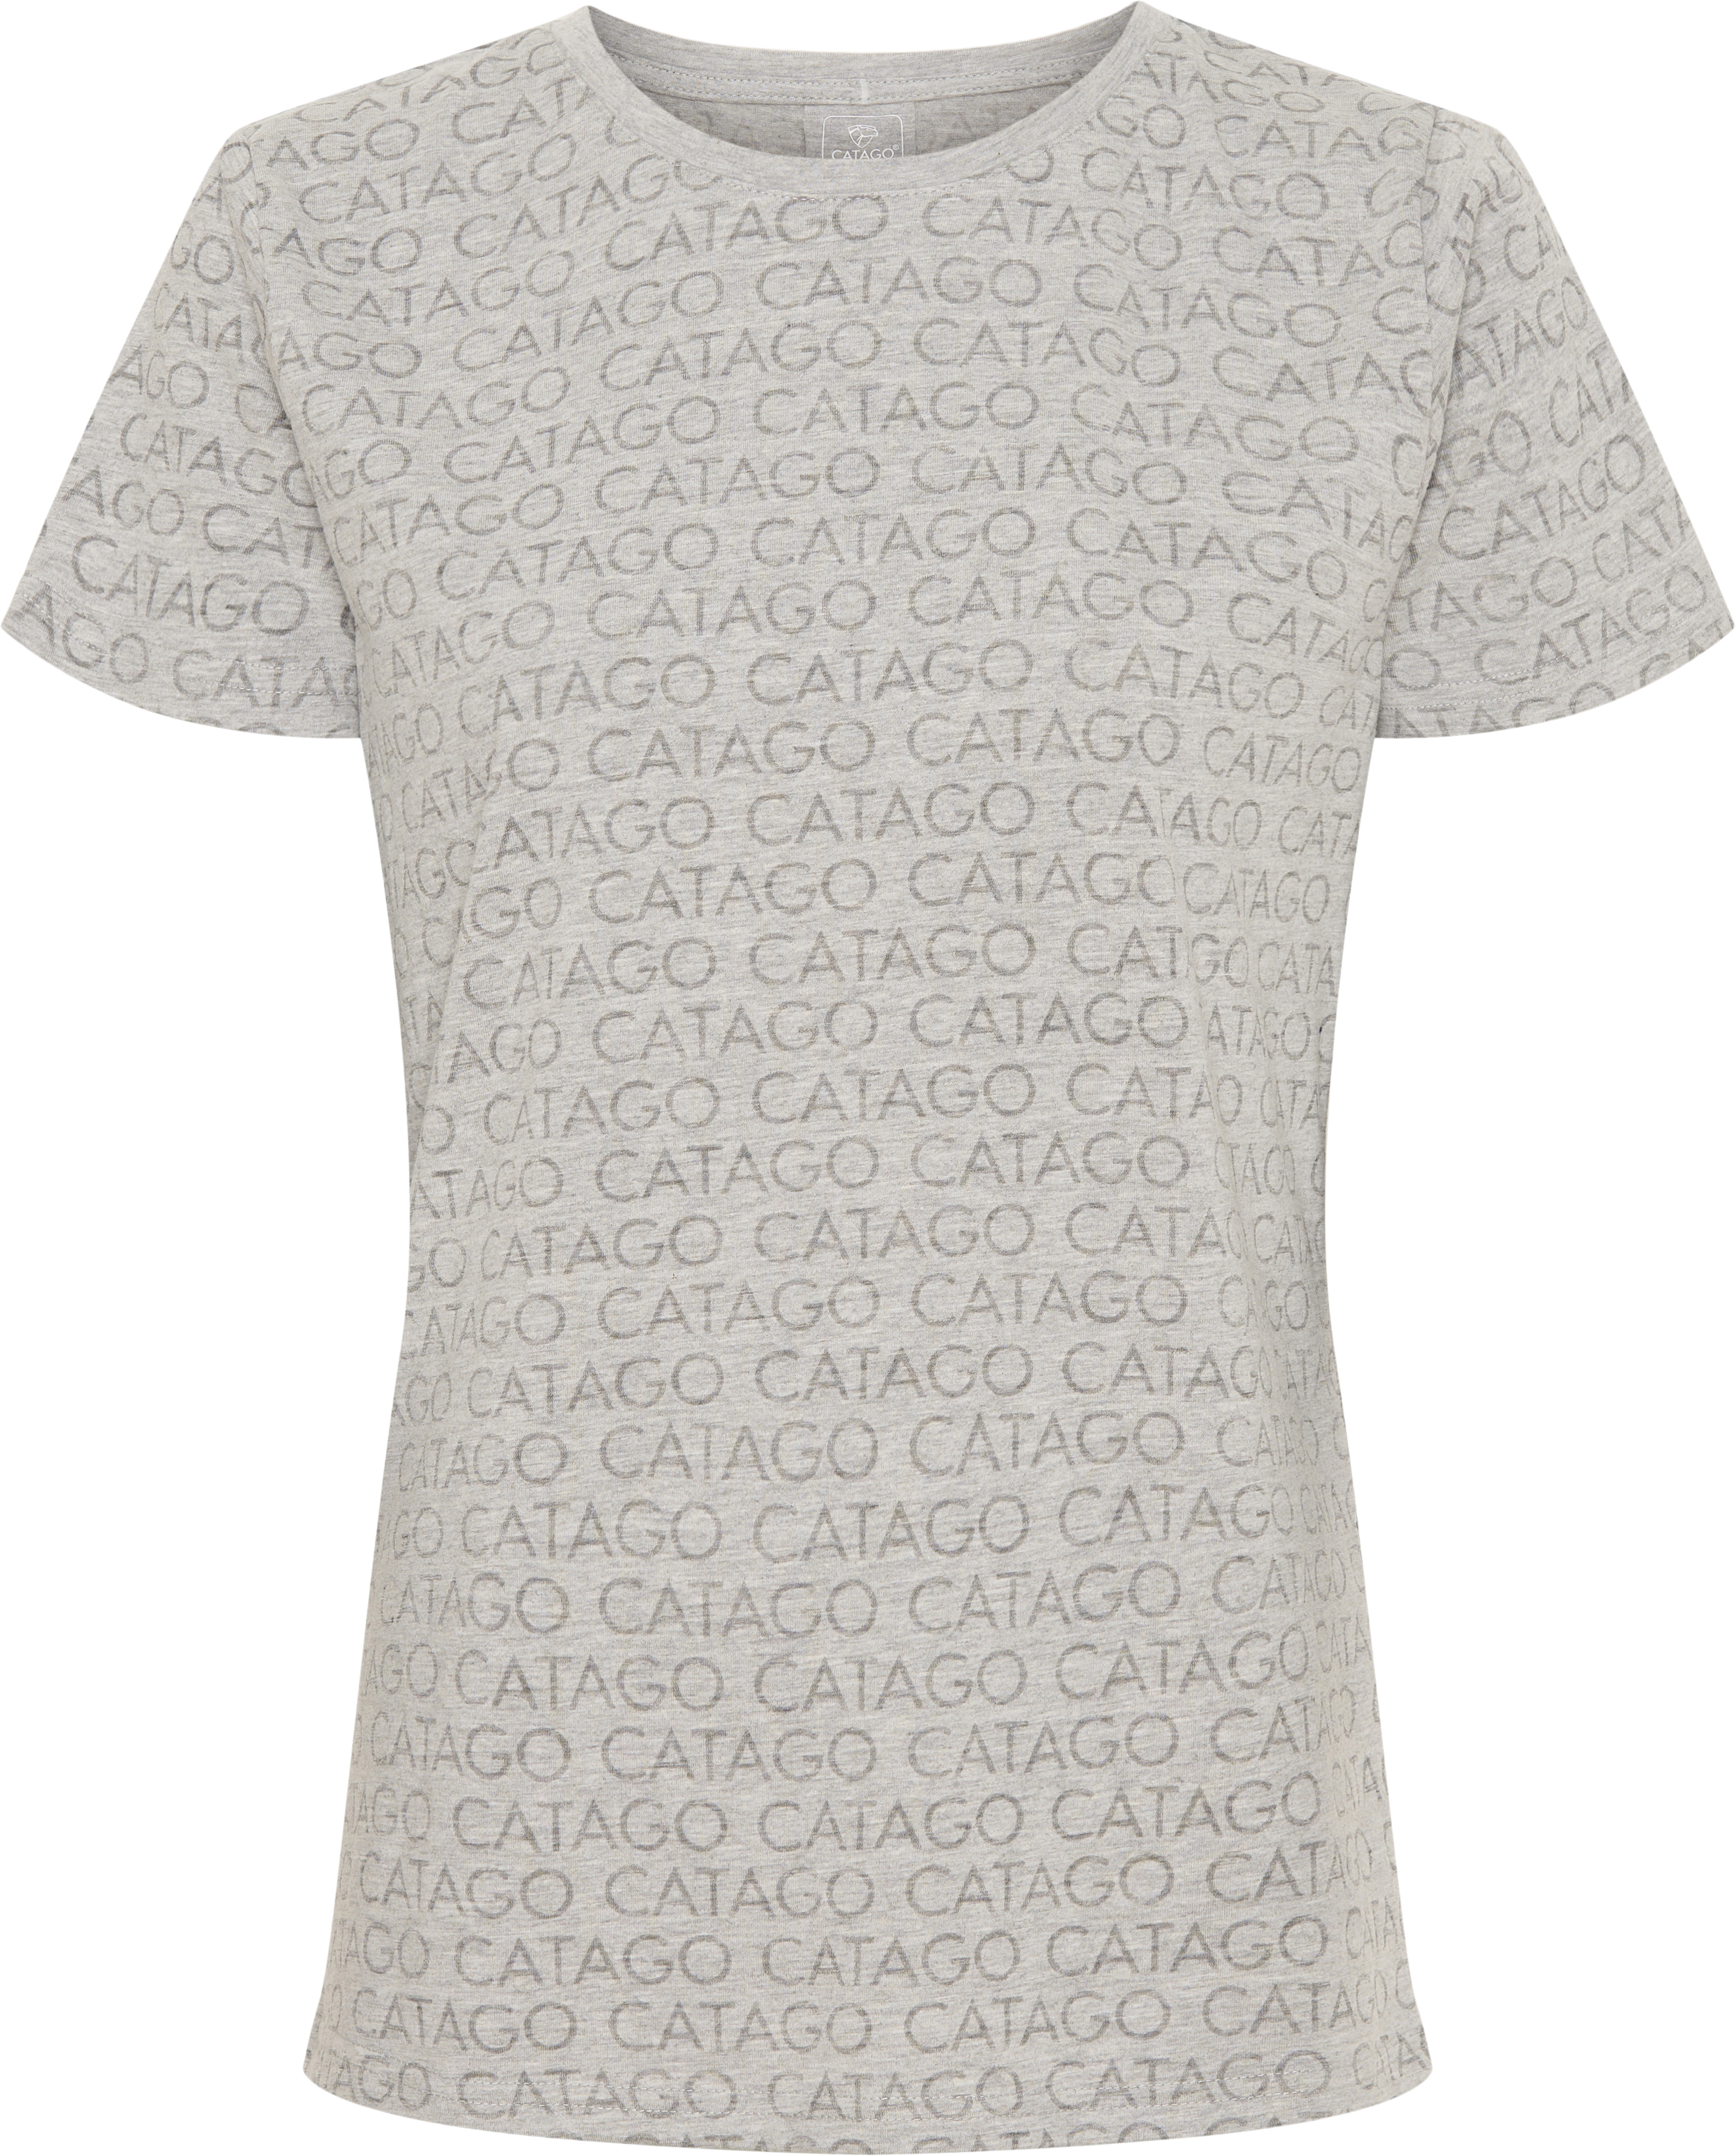 CATAGO Timo T-Shirt With Logo On Sleeves - Grey Melange (S), Catago